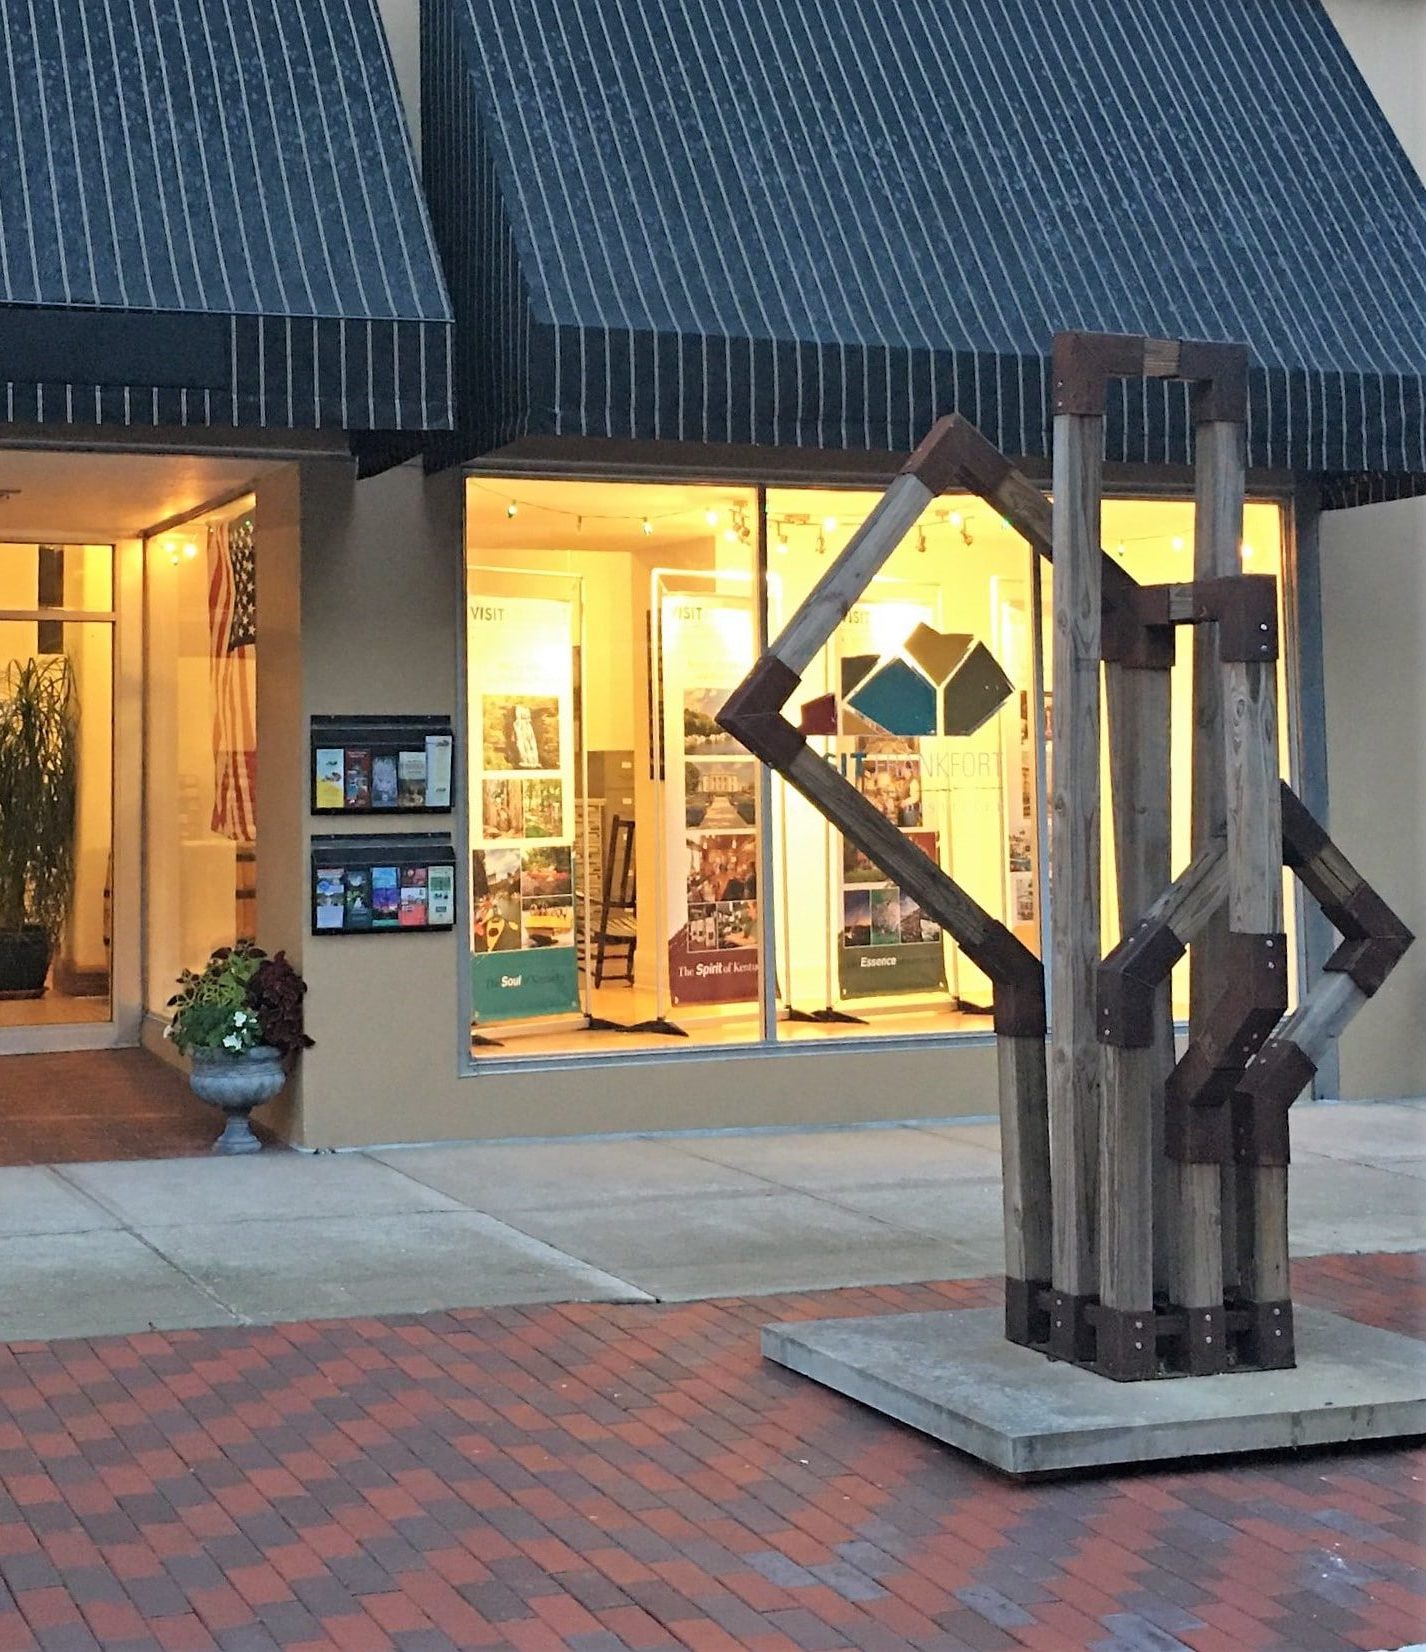 InMotion sculpture outside Visit Frankfort office